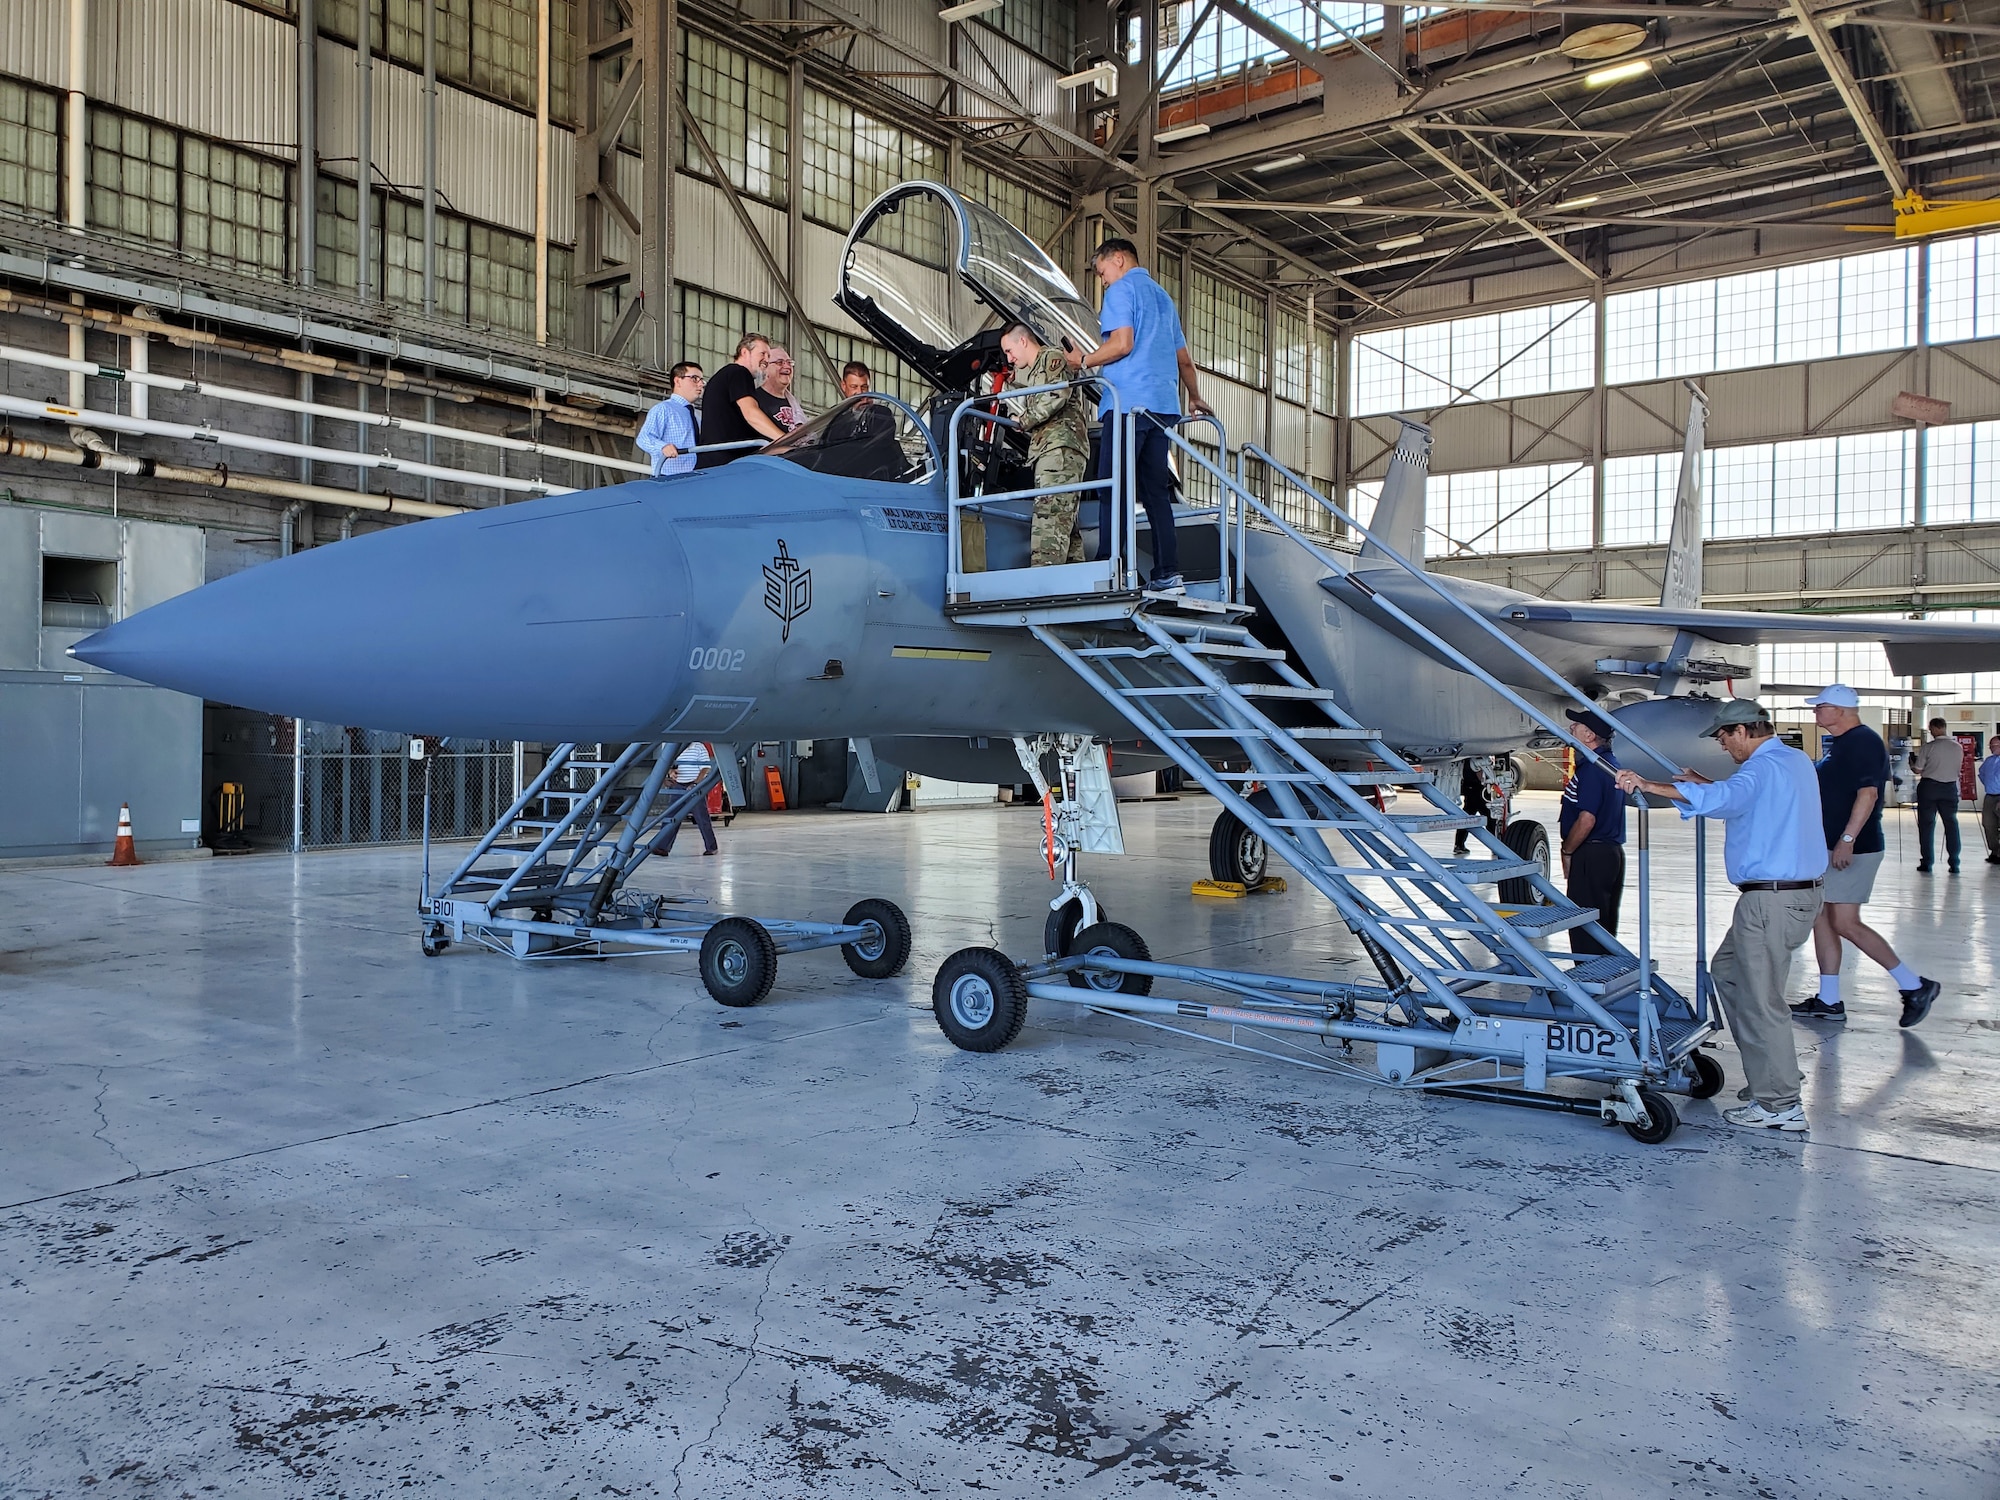 Members of the F-15 Program Office check out an F-15 aircraft during  a ceremony on July 28, 2022, to mark 50 years of flight. (U.S. Air Force photo/ Brian Brackens)